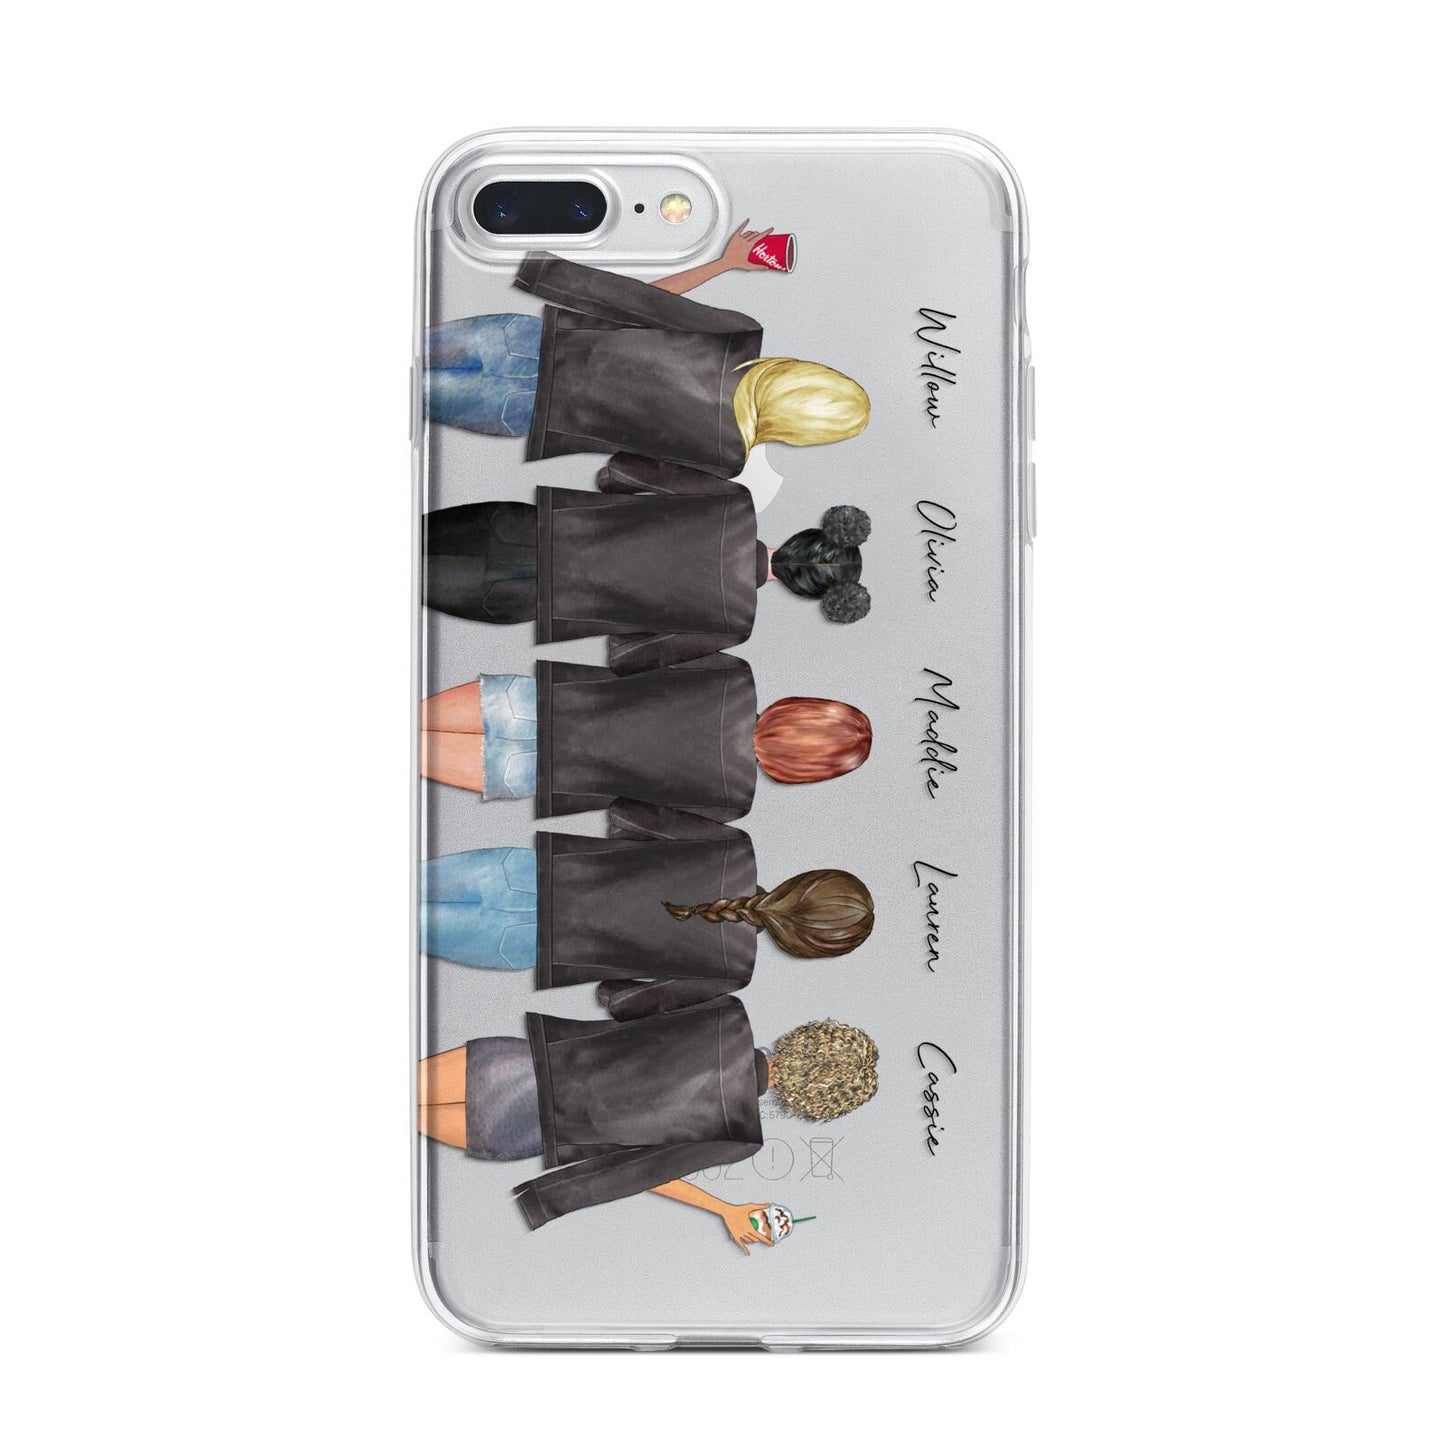 5 Best Friends with Names iPhone 7 Plus Bumper Case on Silver iPhone